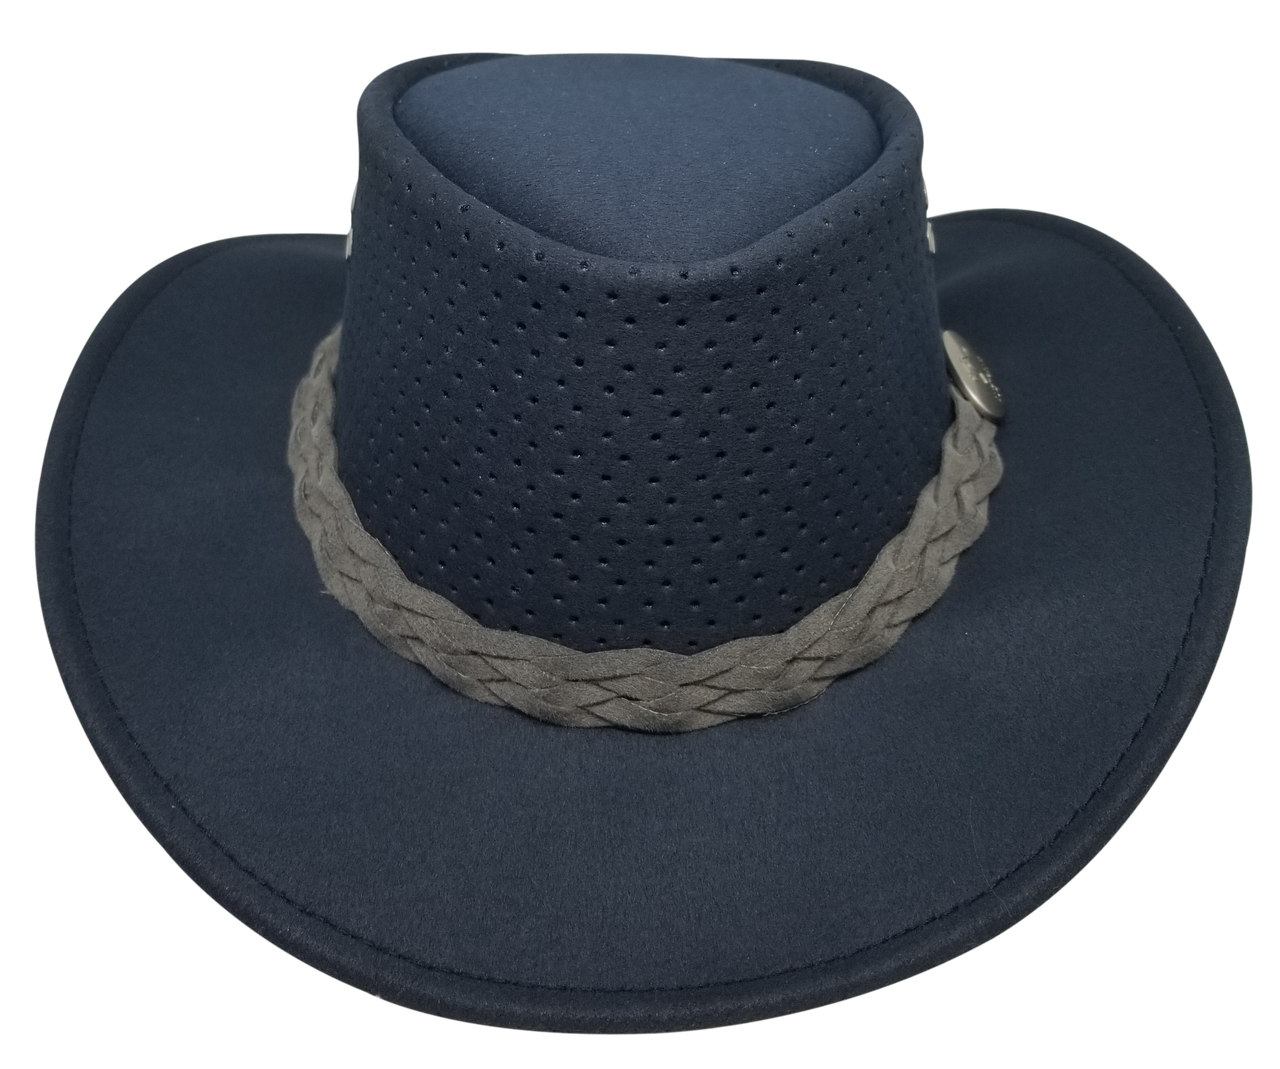 Aussie Chiller Outback Bushie Perforated Hat – Navy